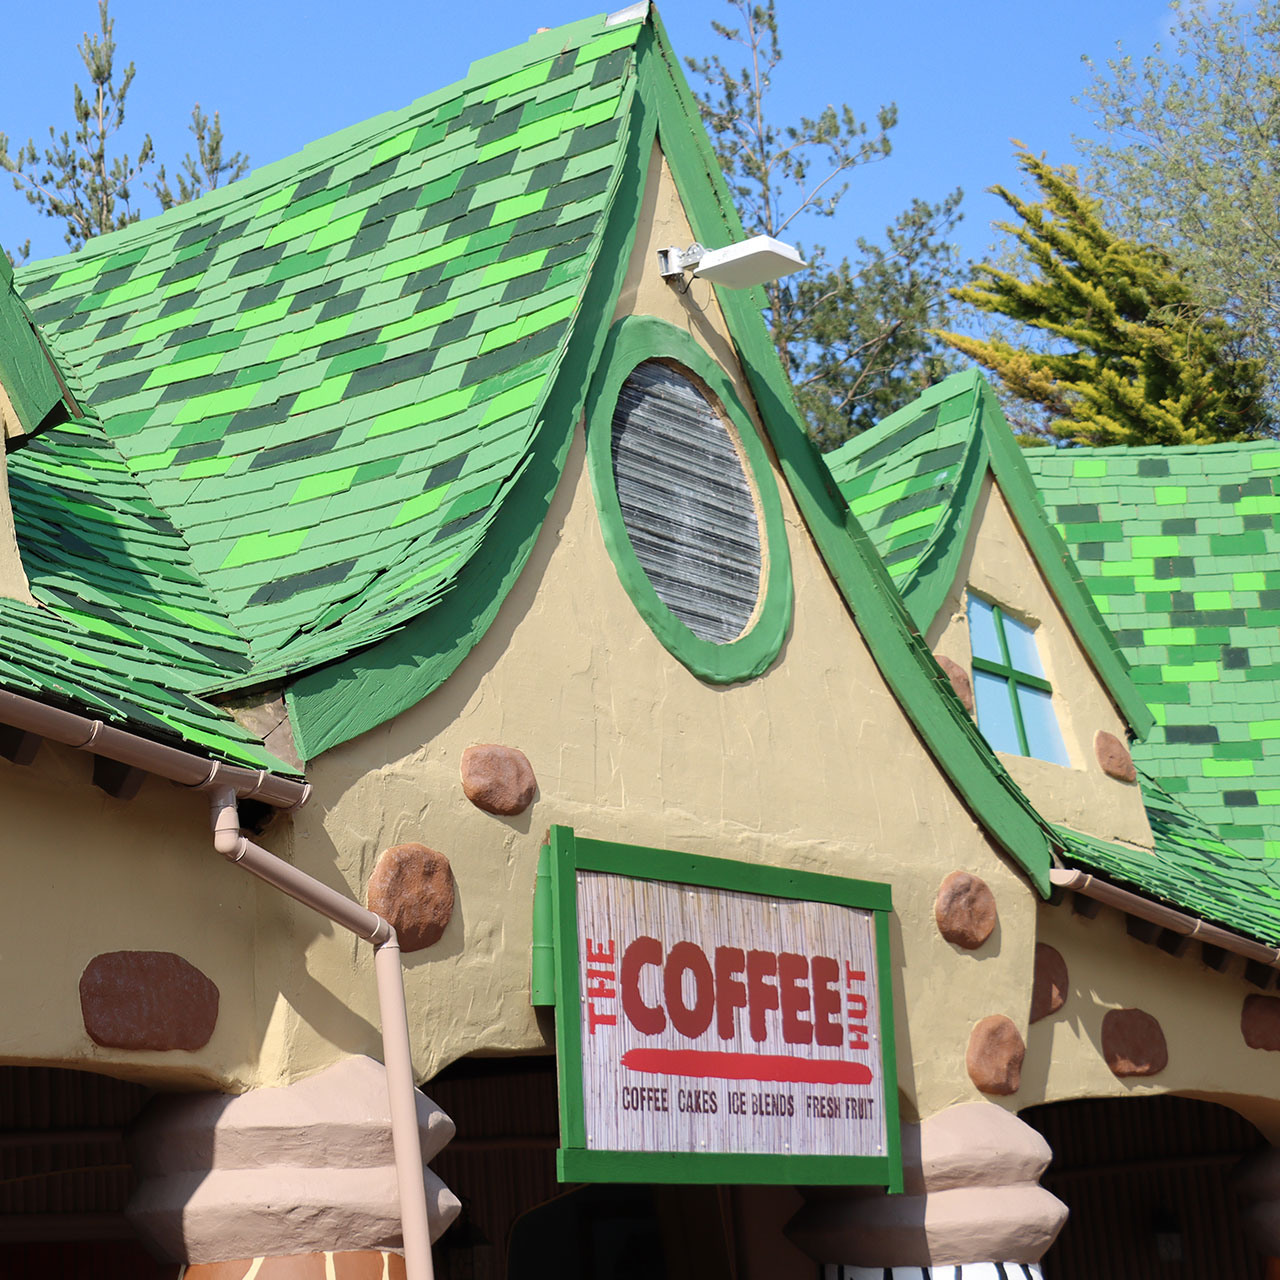 The Coffee Hut Page Icon Image